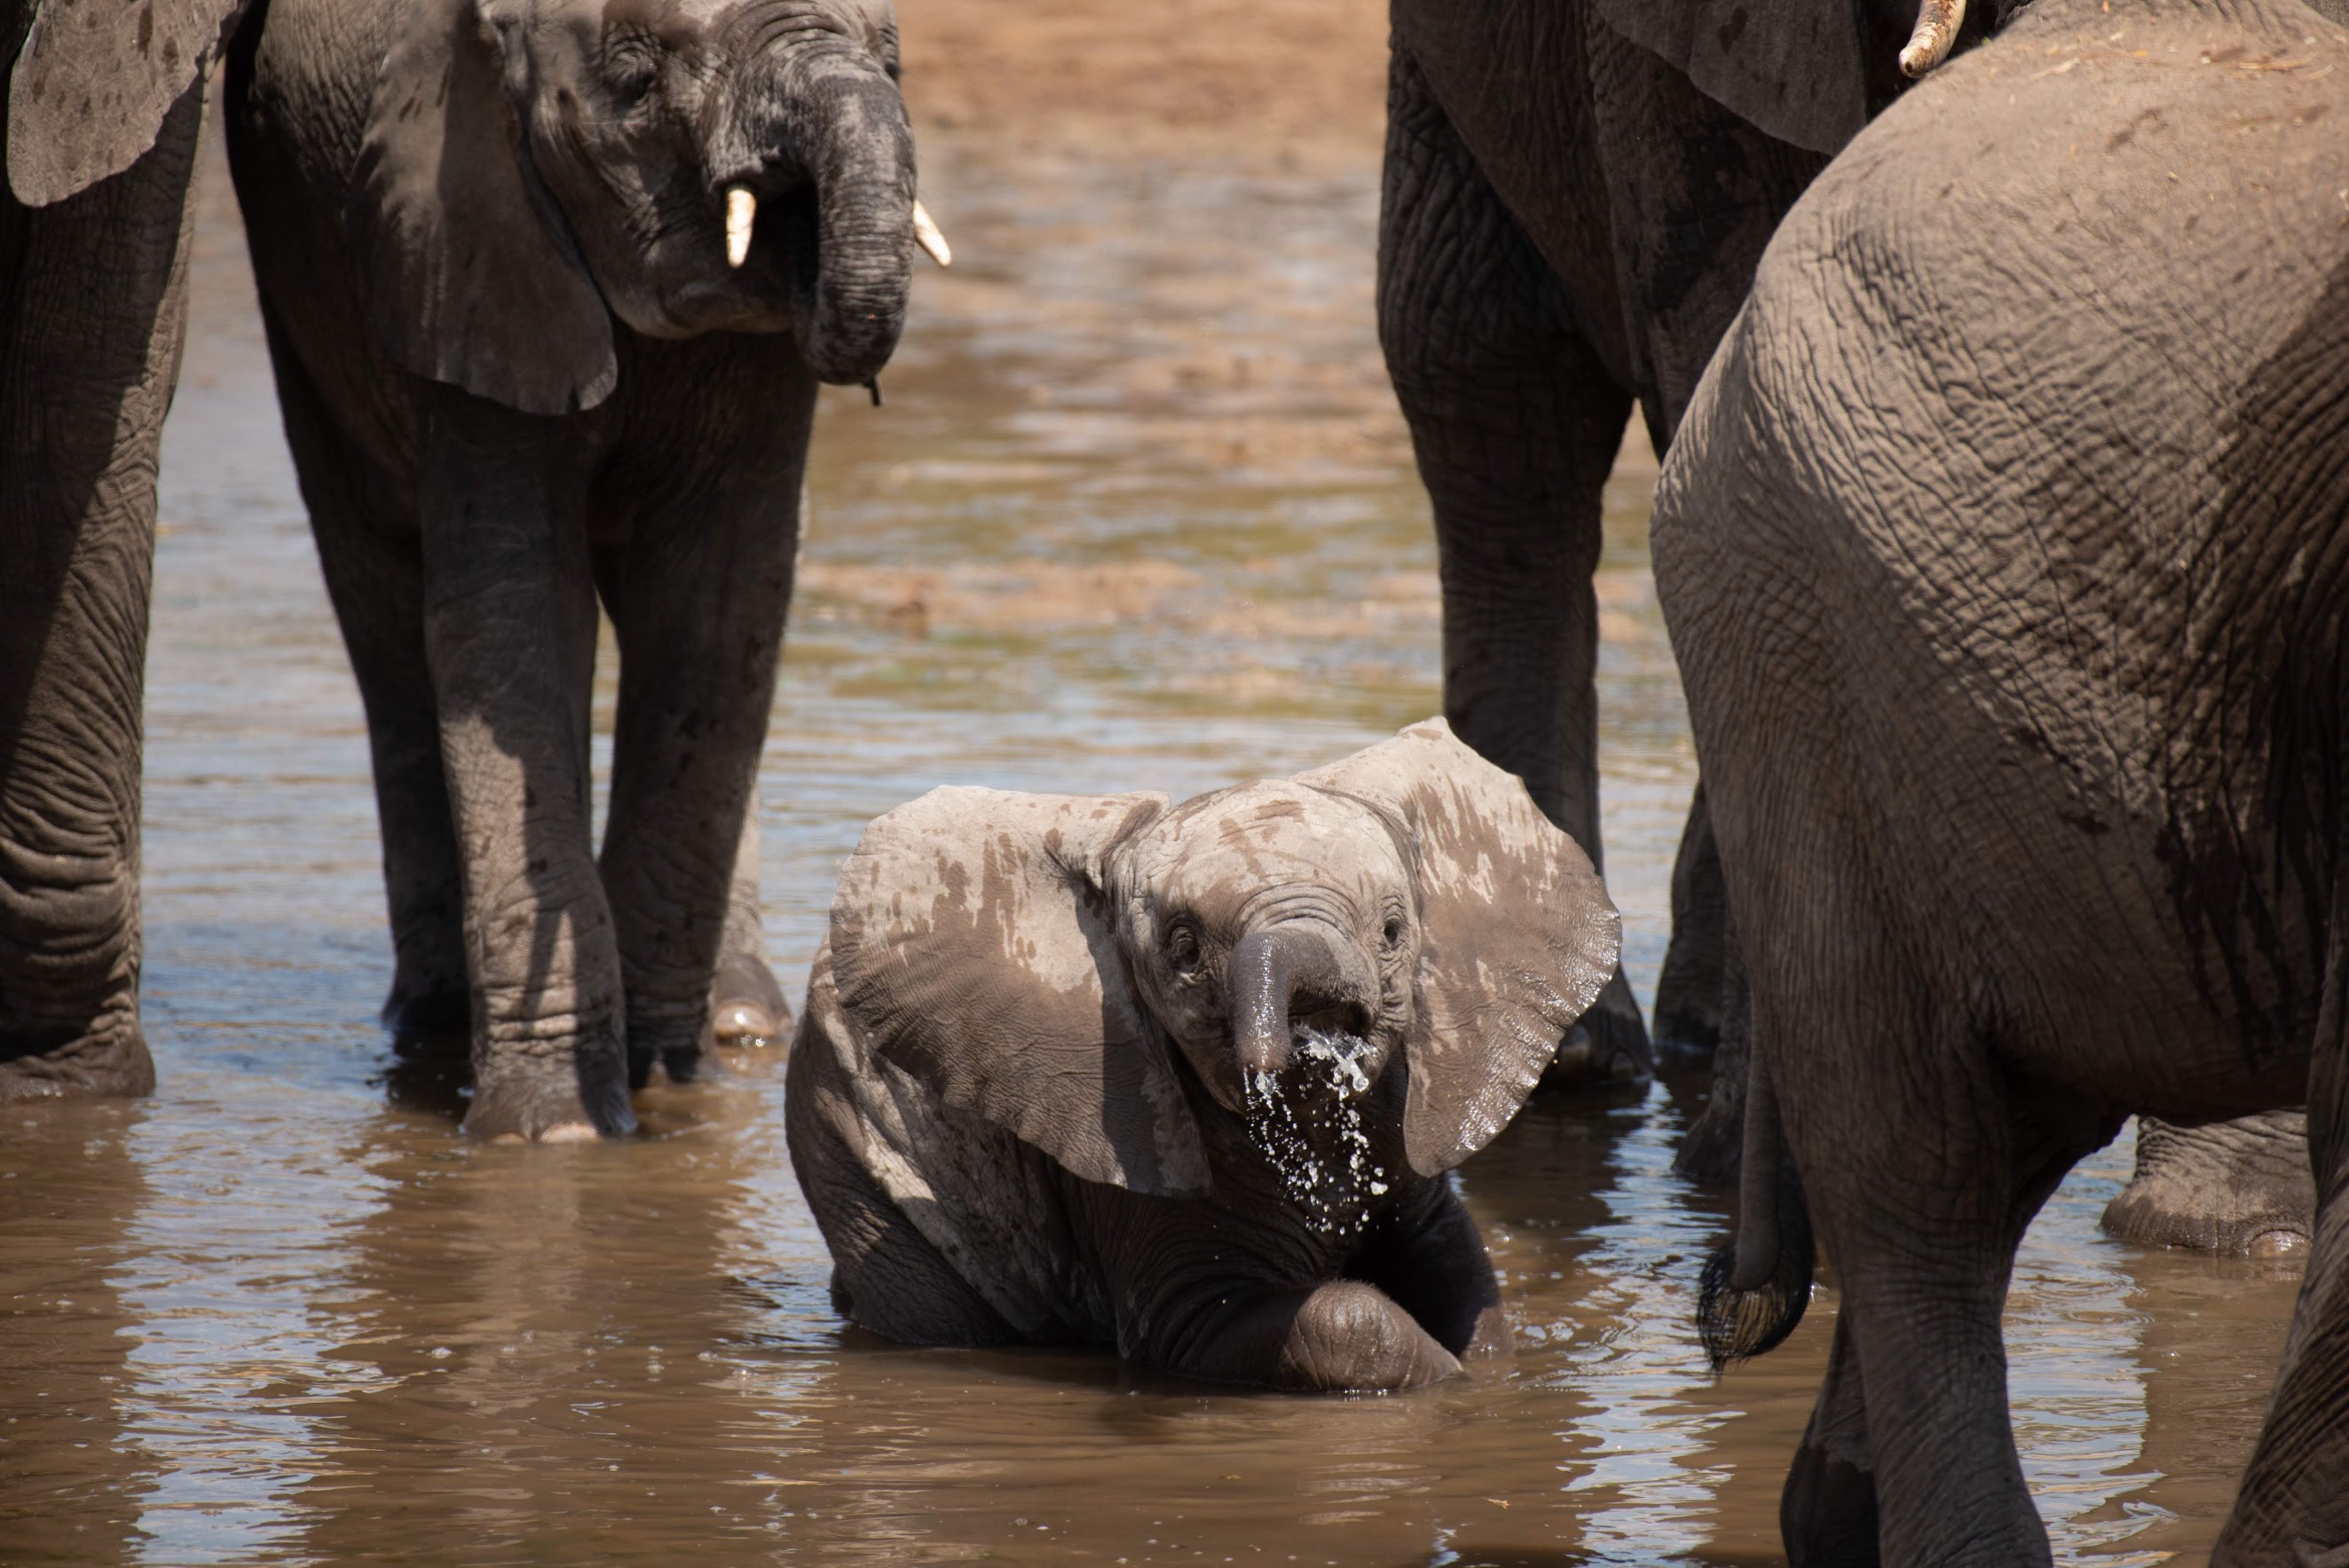 A baby elephant bathes in a watering hole among adults